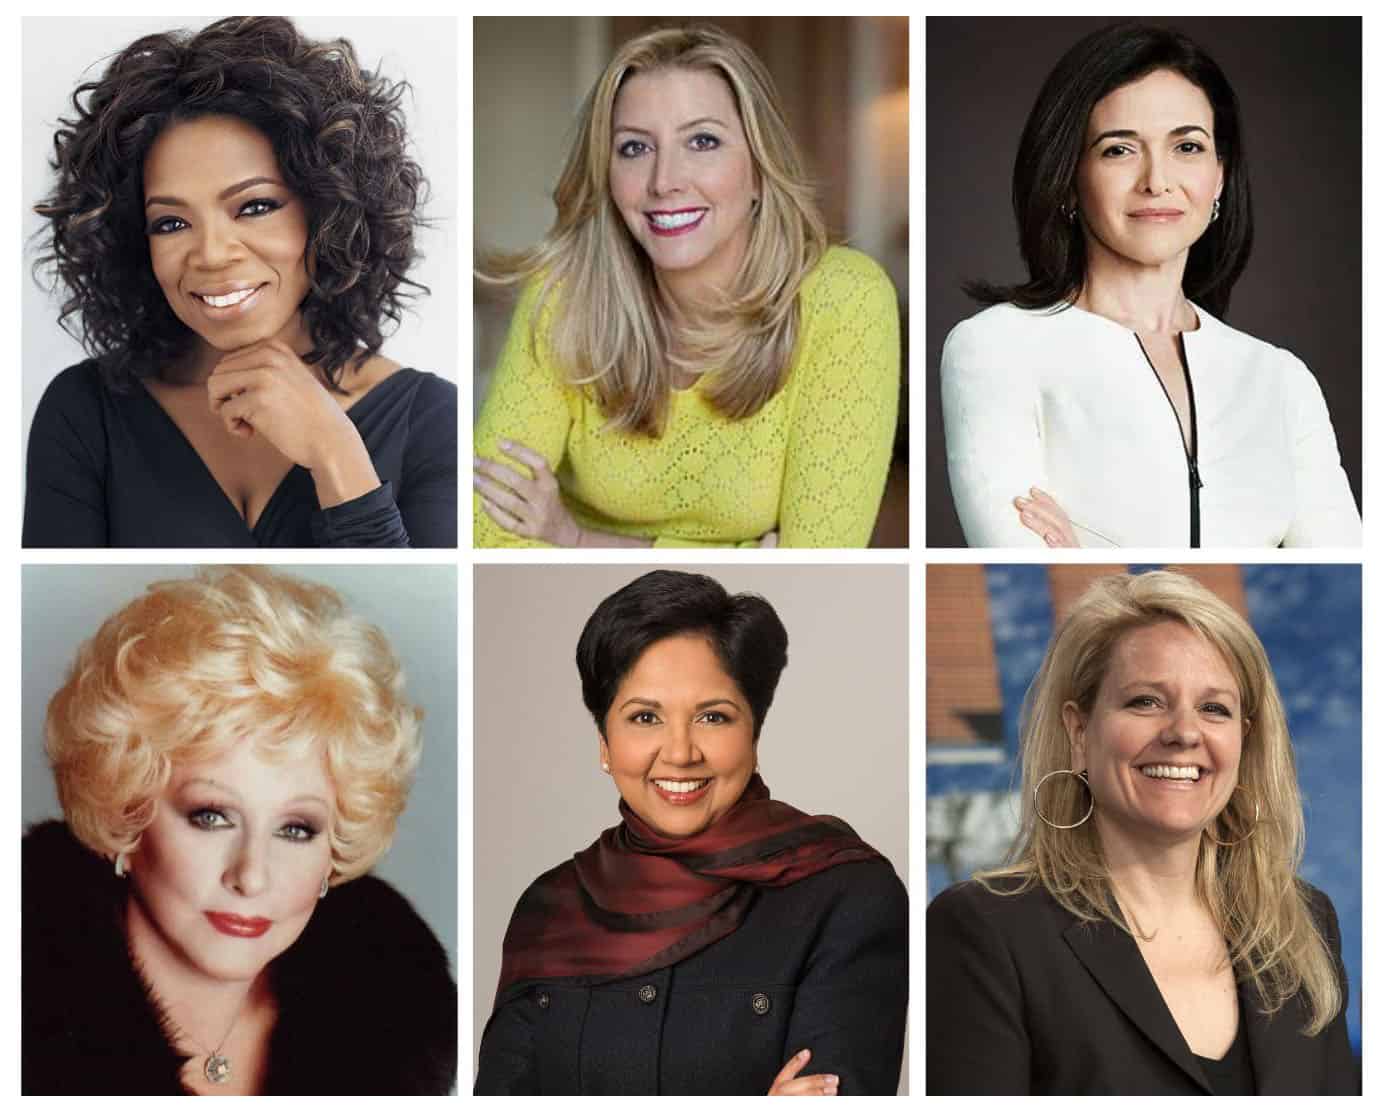 Women Entrepreneurs Who Defied the Odds